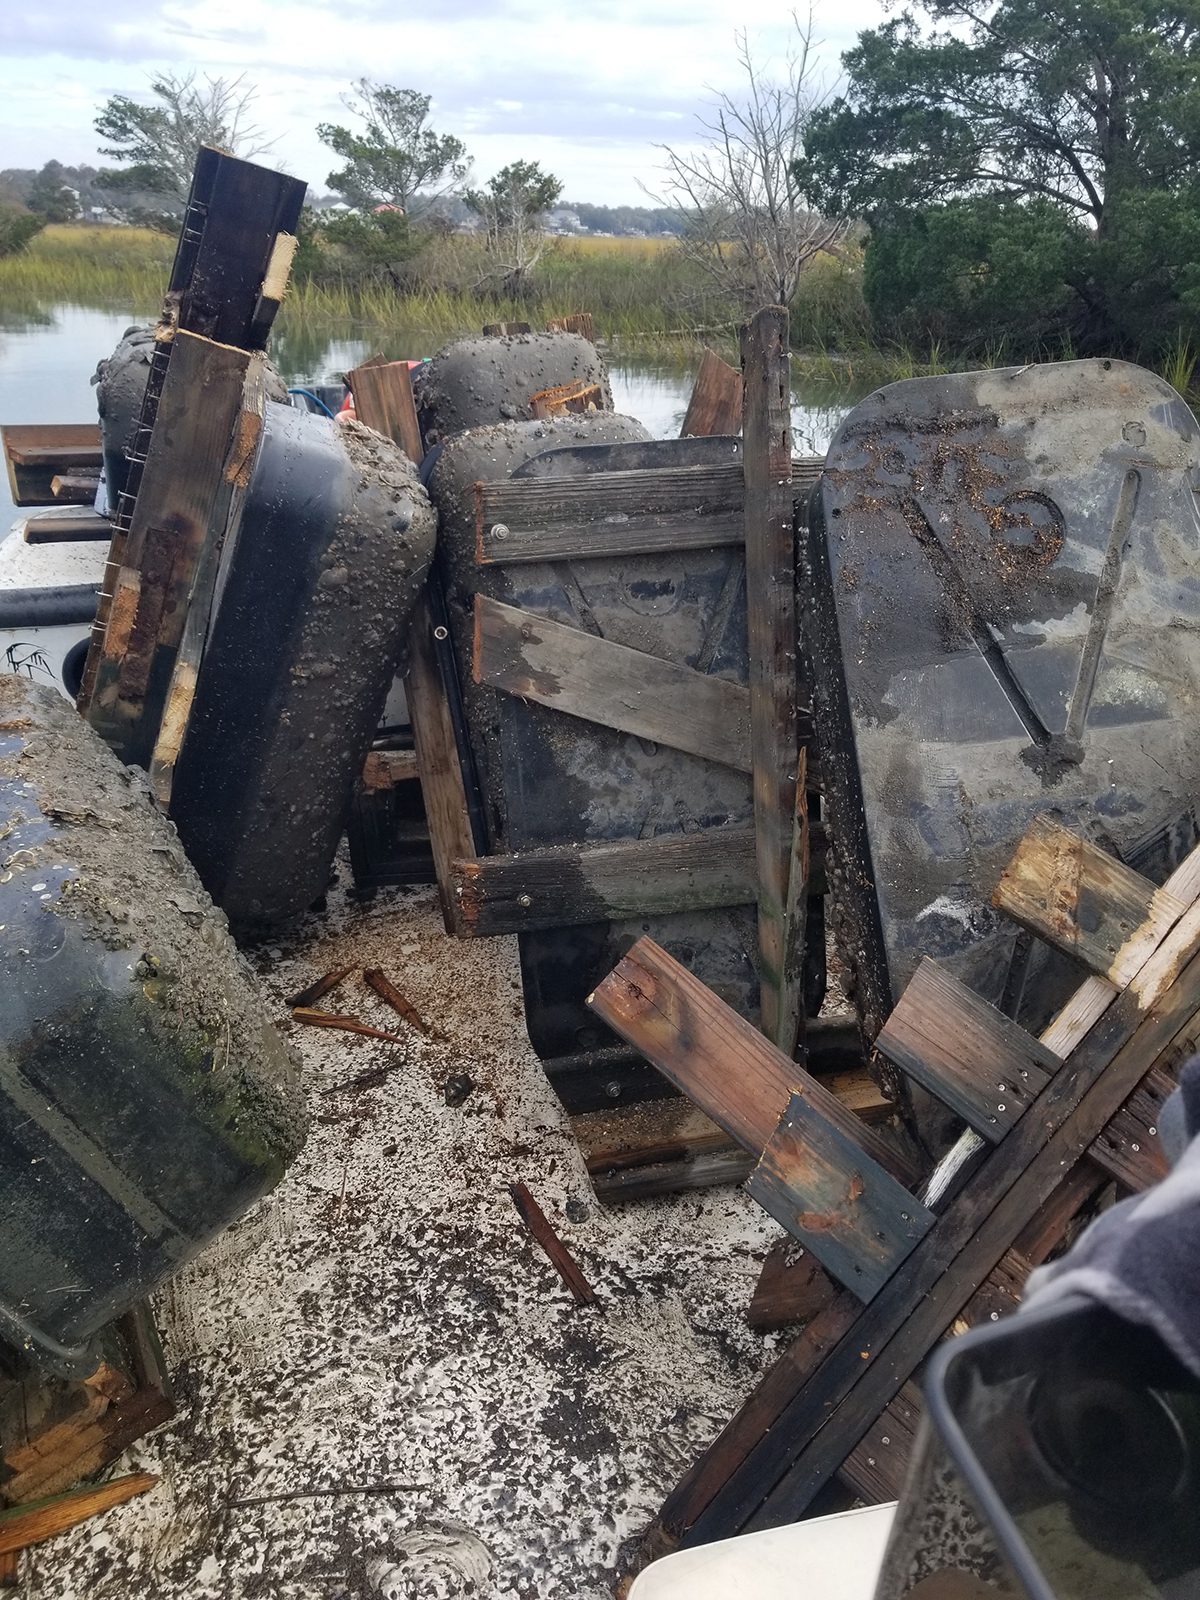 A pile of debris from a floating dock in a swamp in Brunswick County. Photo courtesy of Joe Huey.